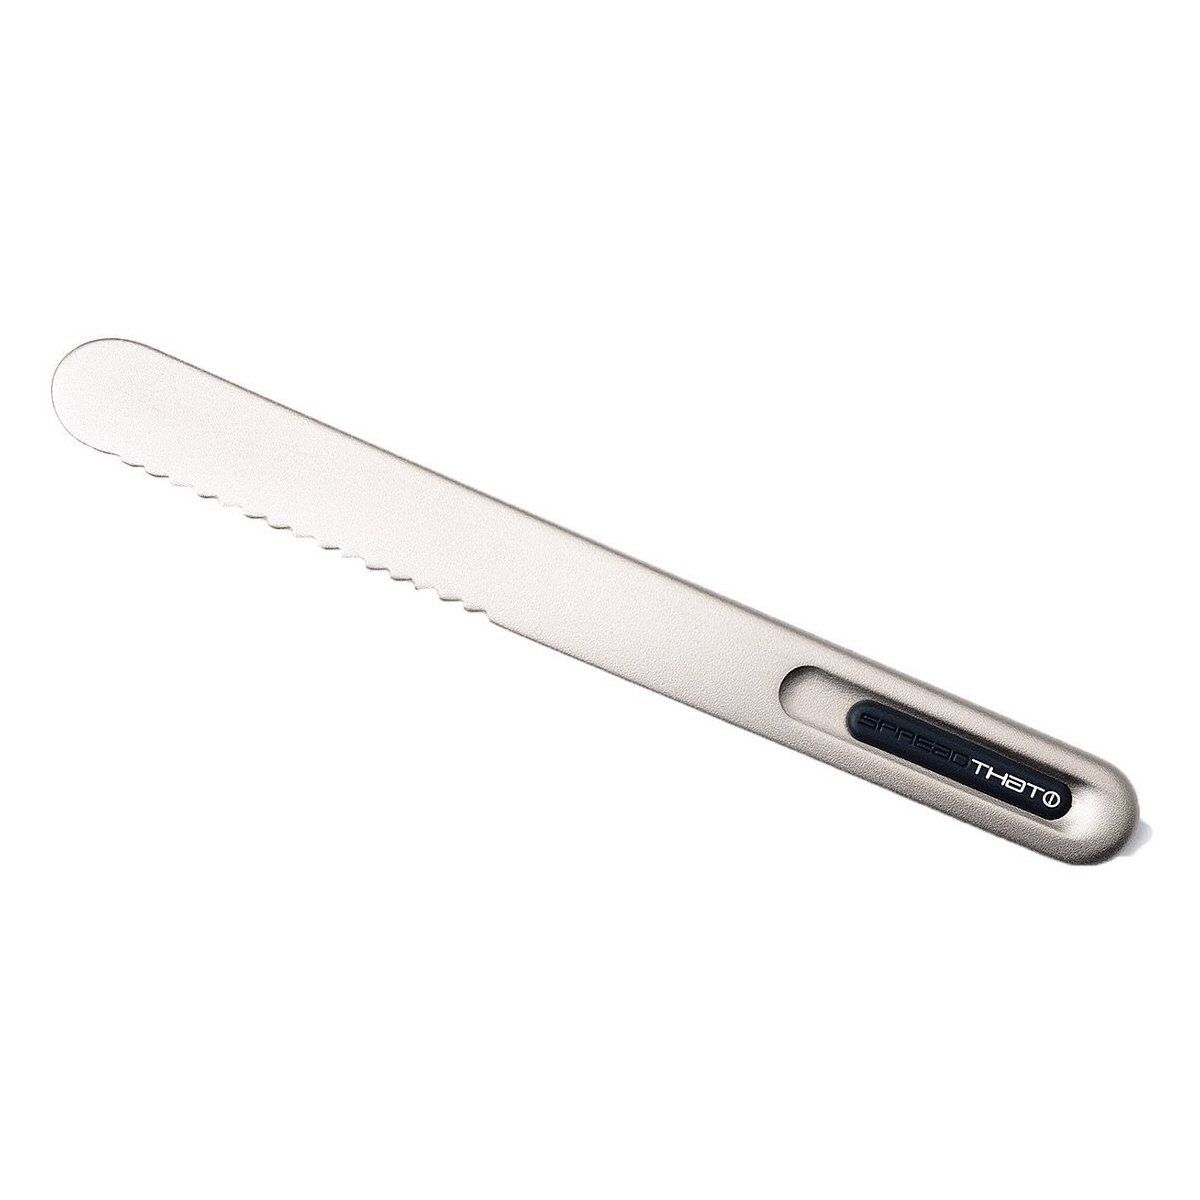 That! SpreadThat! II Heat Conducting Serrated Butter Knife - Red